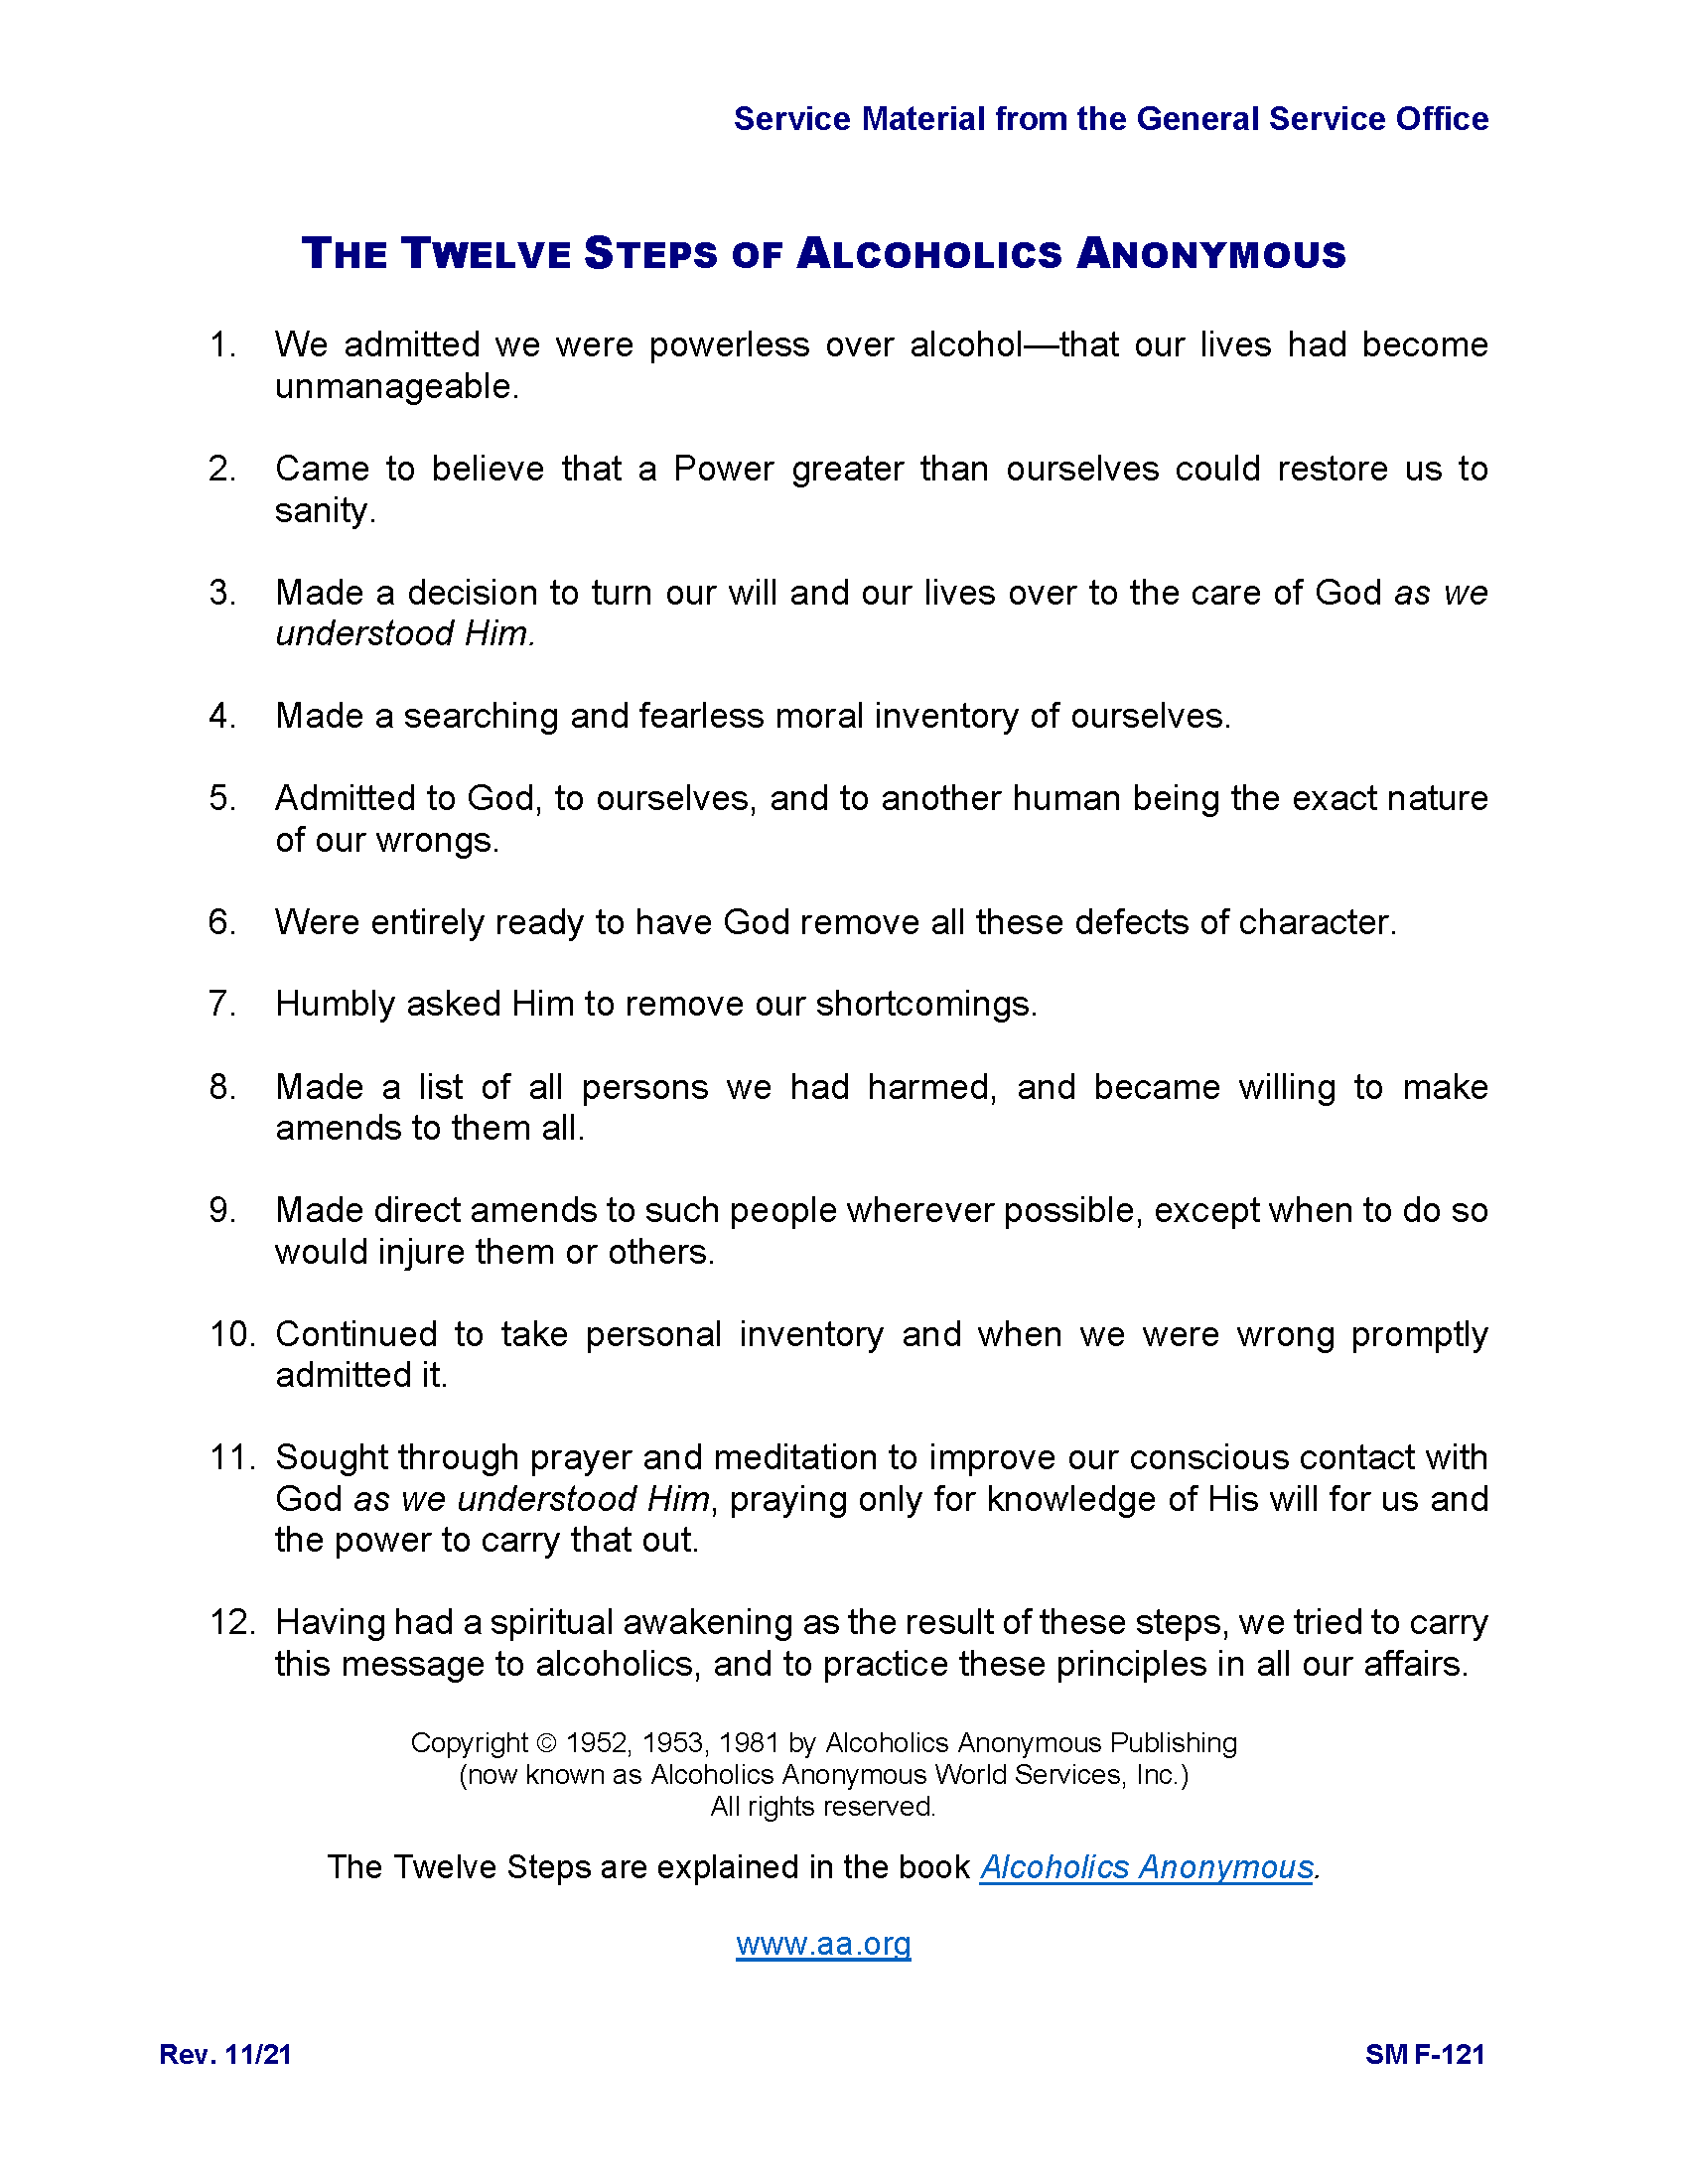 the-twelve-steps-of-alcoholics-anonymous-alcoholics-anonymous